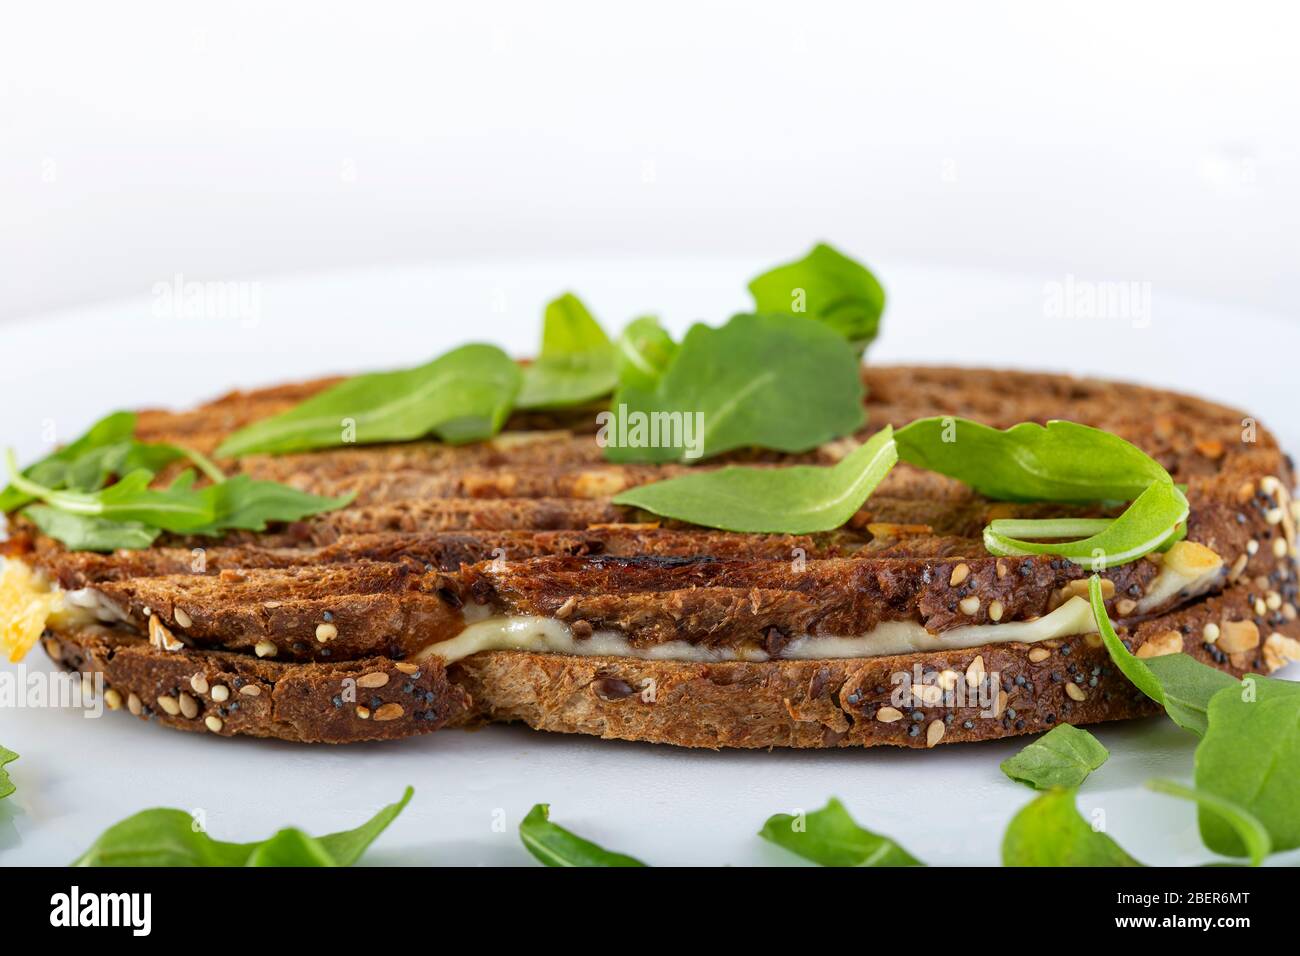 Toasted sandwich with cheese, ham and green arugula Stock Photo